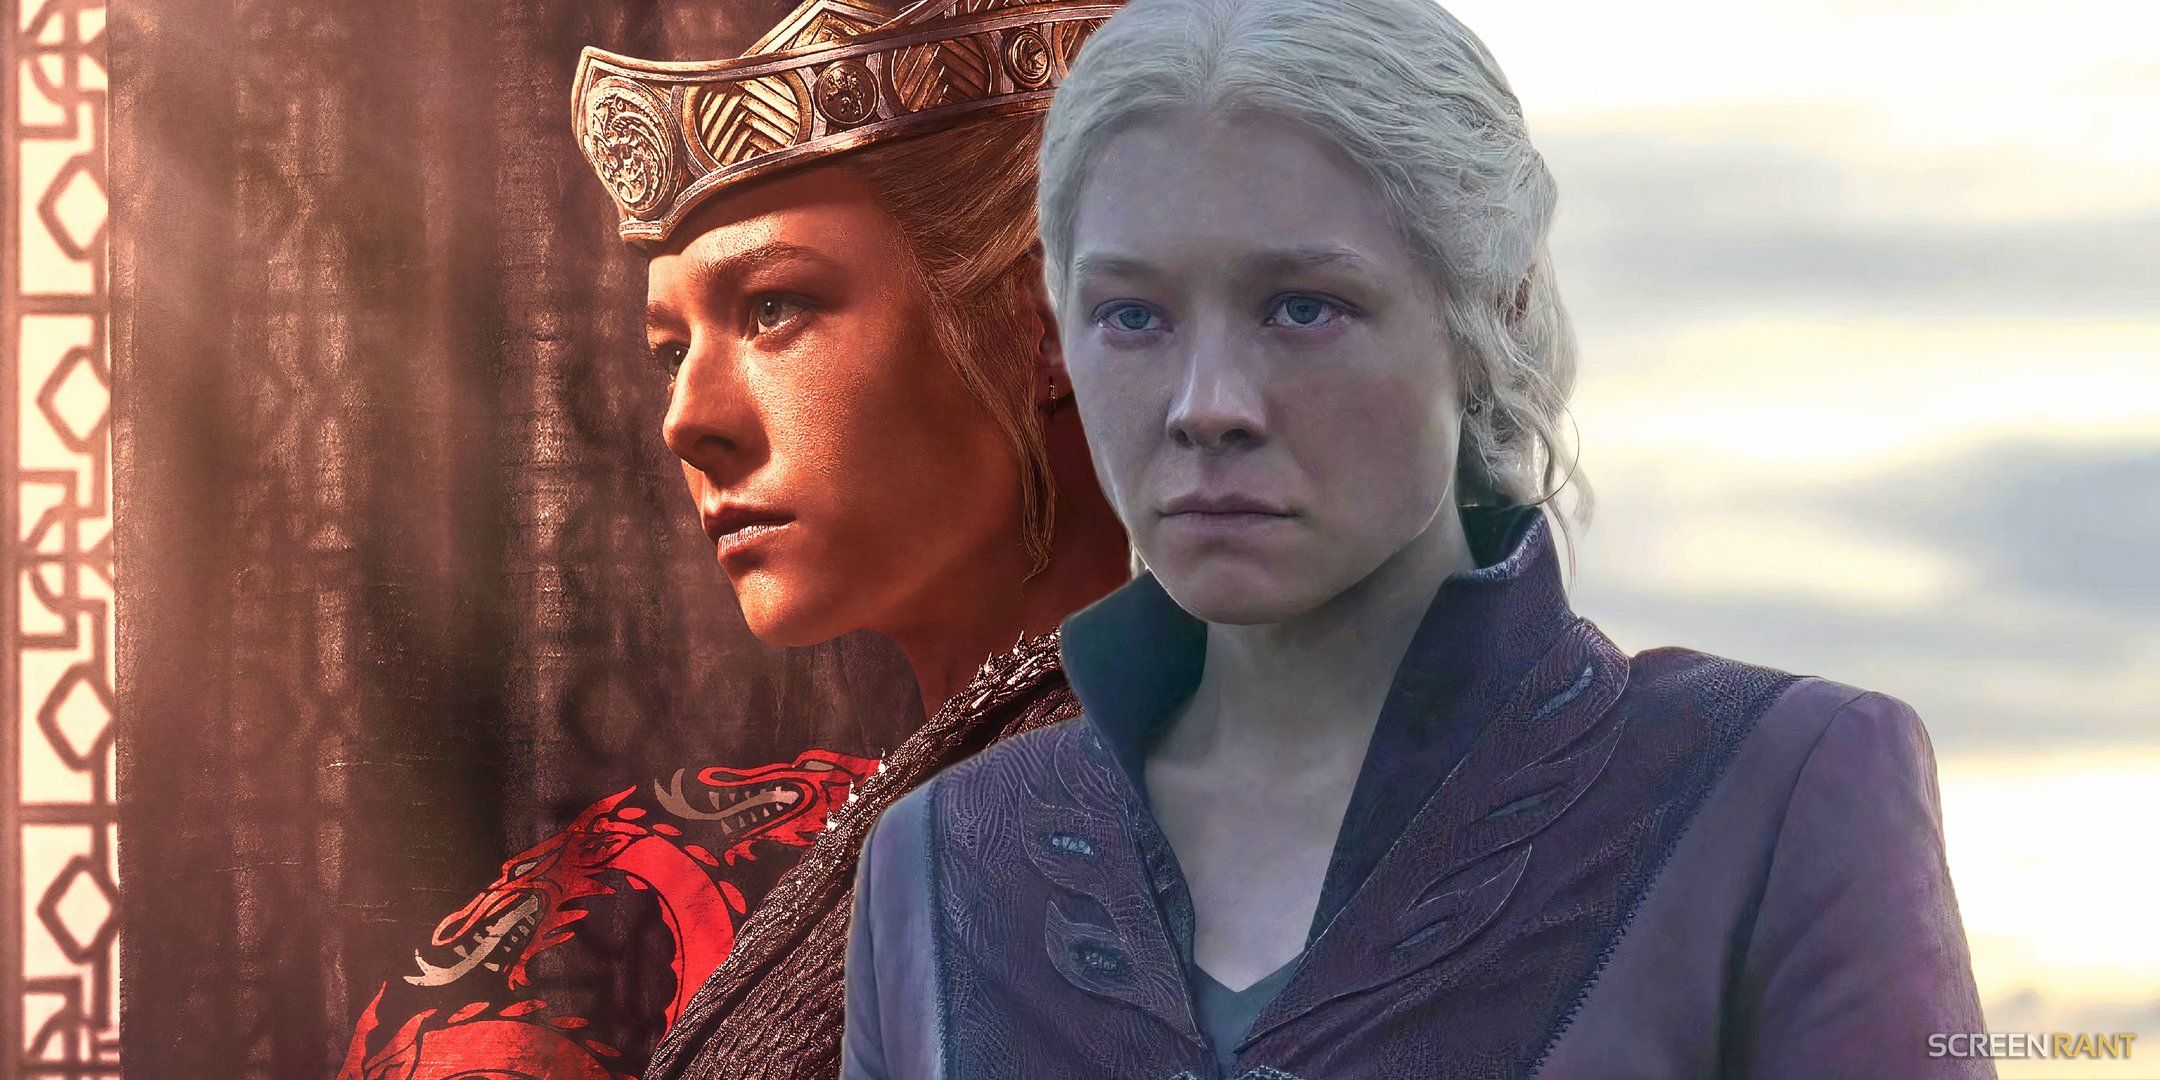 Emma D'Arcy as Rhaenyra wearing a crown and looking mad in House of the Dragon season 2